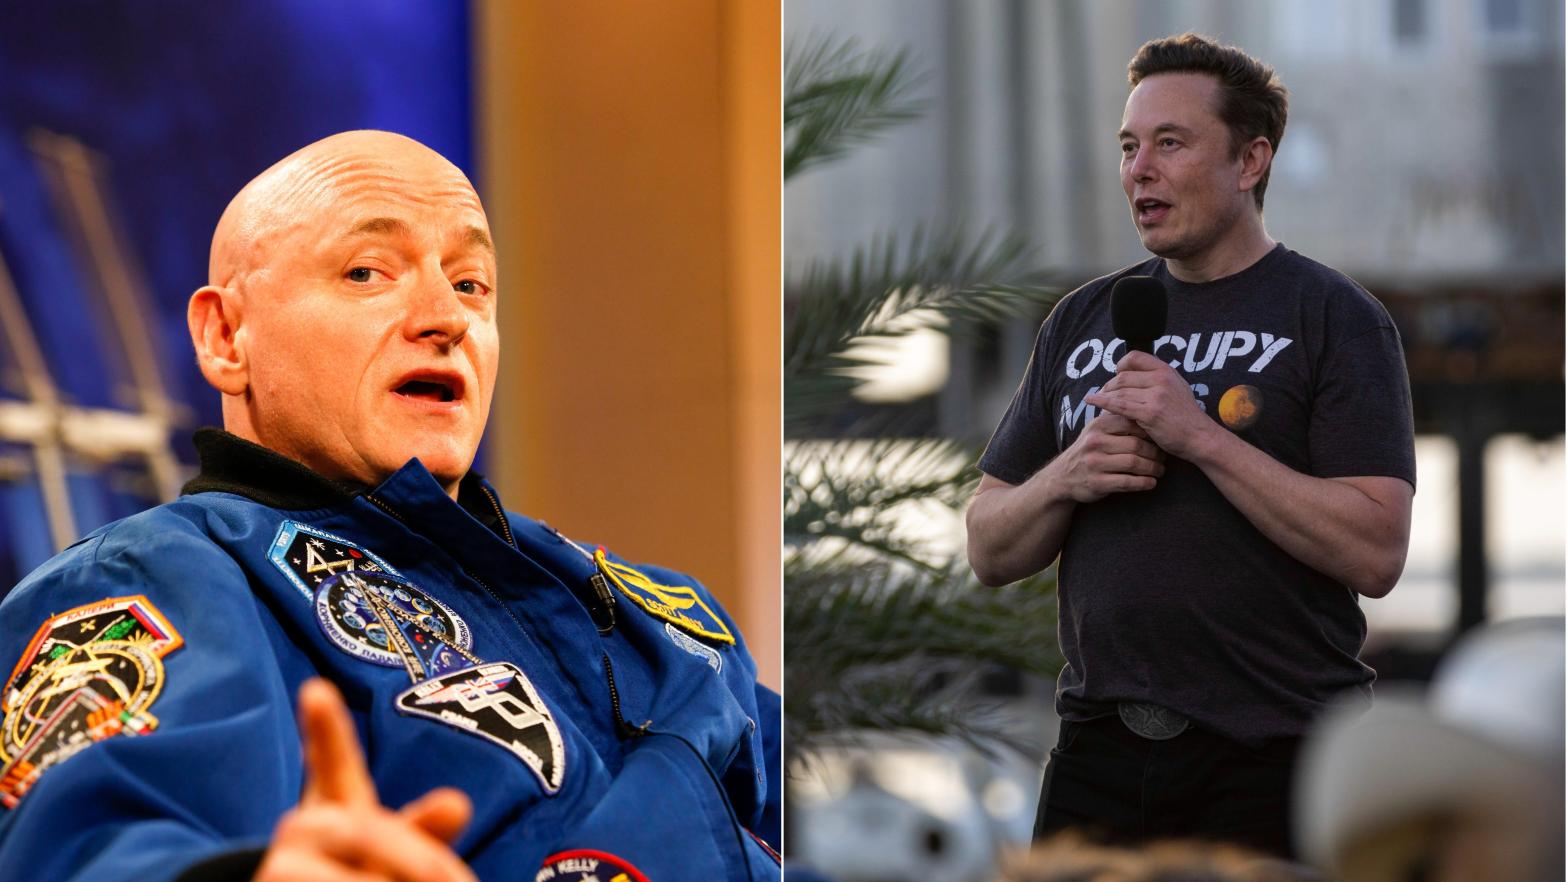 Ex-NASA astronaut Scott Kelly, left, has previously traded barbs with SpaceX CEO Elon Musk, right. Kelly told Musk he needs to allow Starlink to facilitate use of drones since 'precision strike in defence of sovereignty is not escalatory.